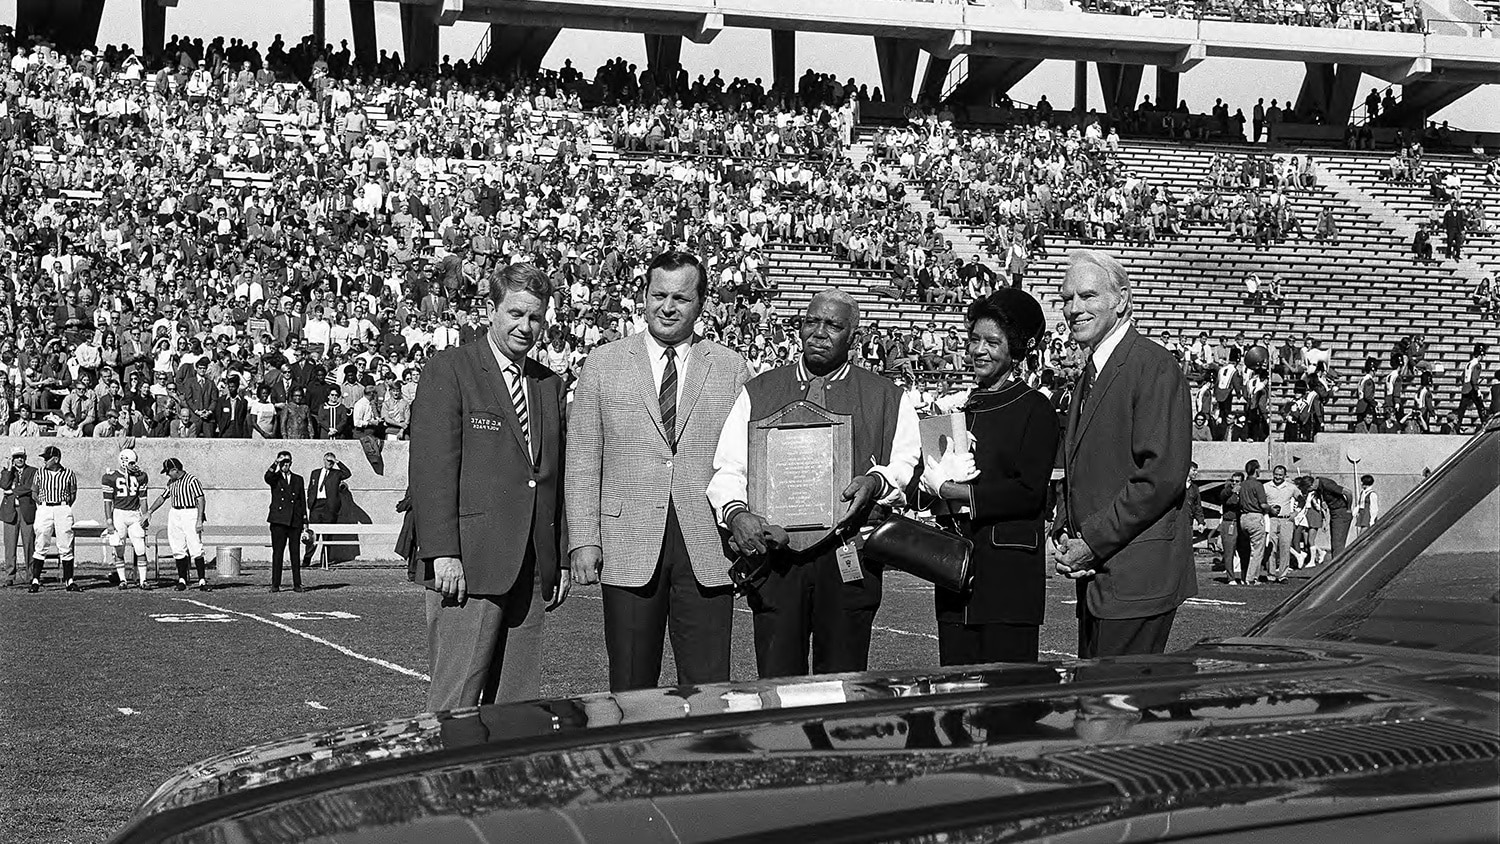 Chester Grant is honored during a halftime event in 1970.